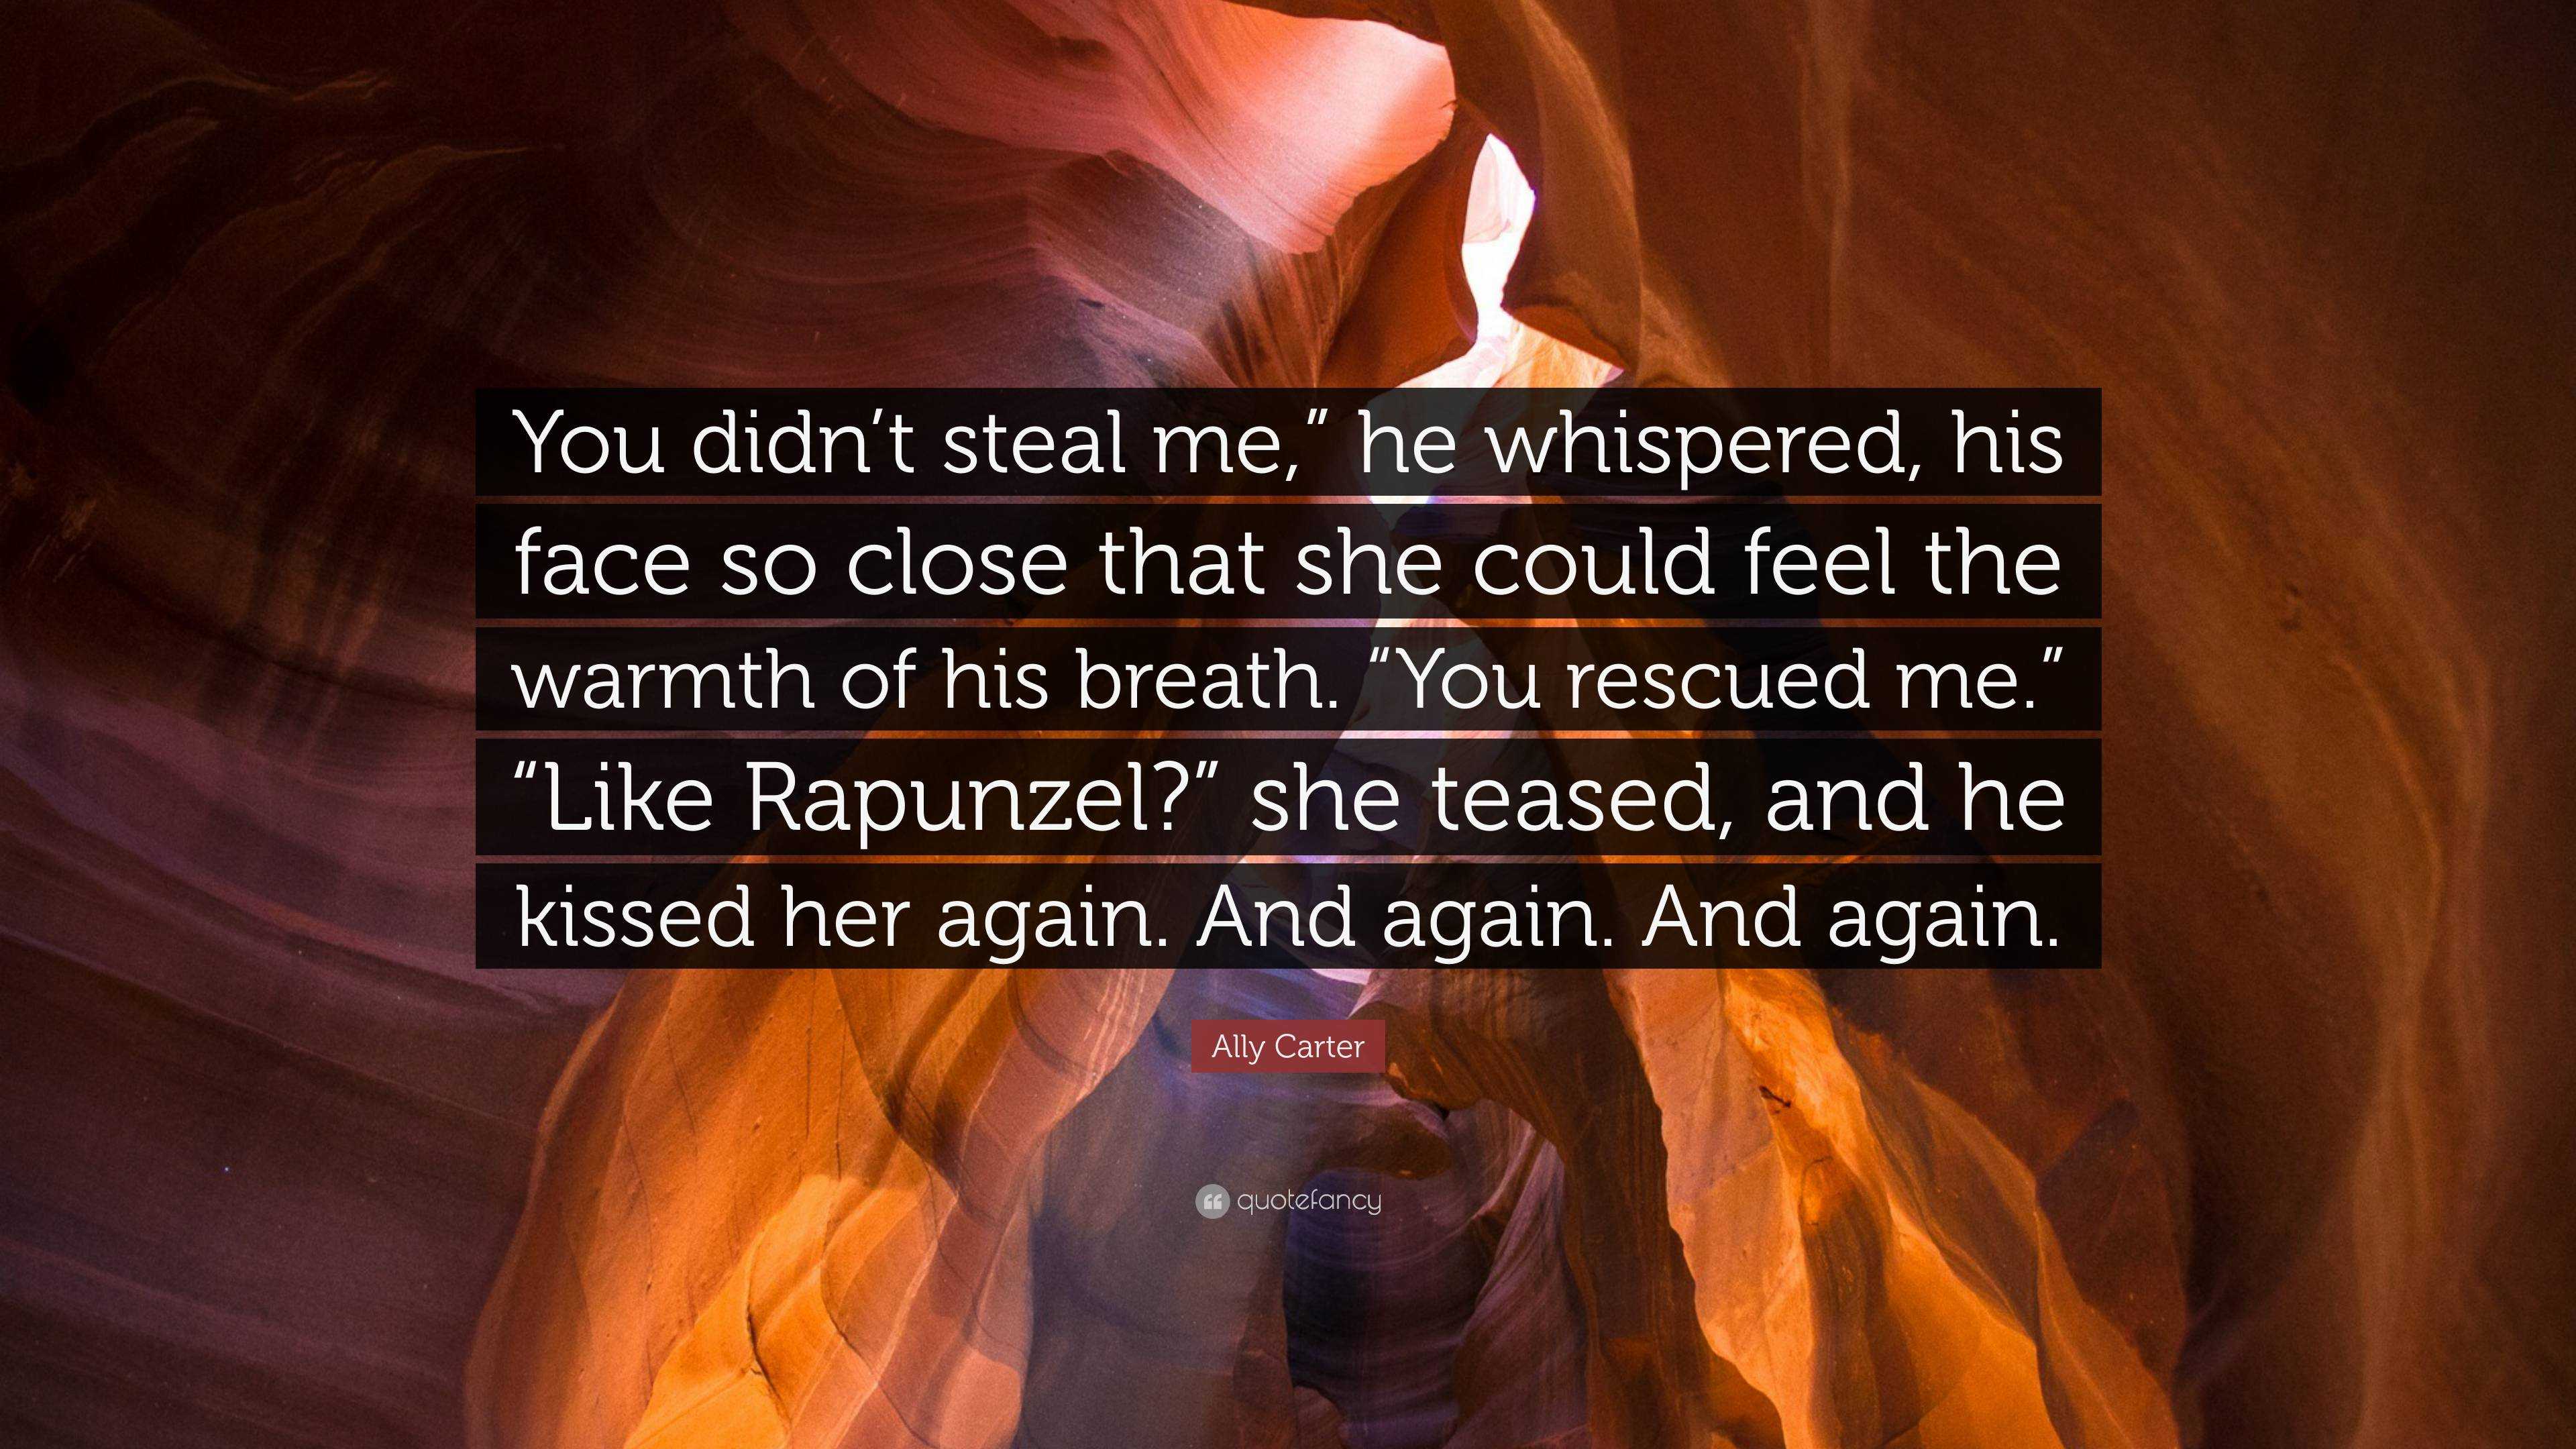 Ally Carter Quote: “You didn't steal me,” he whispered, his face